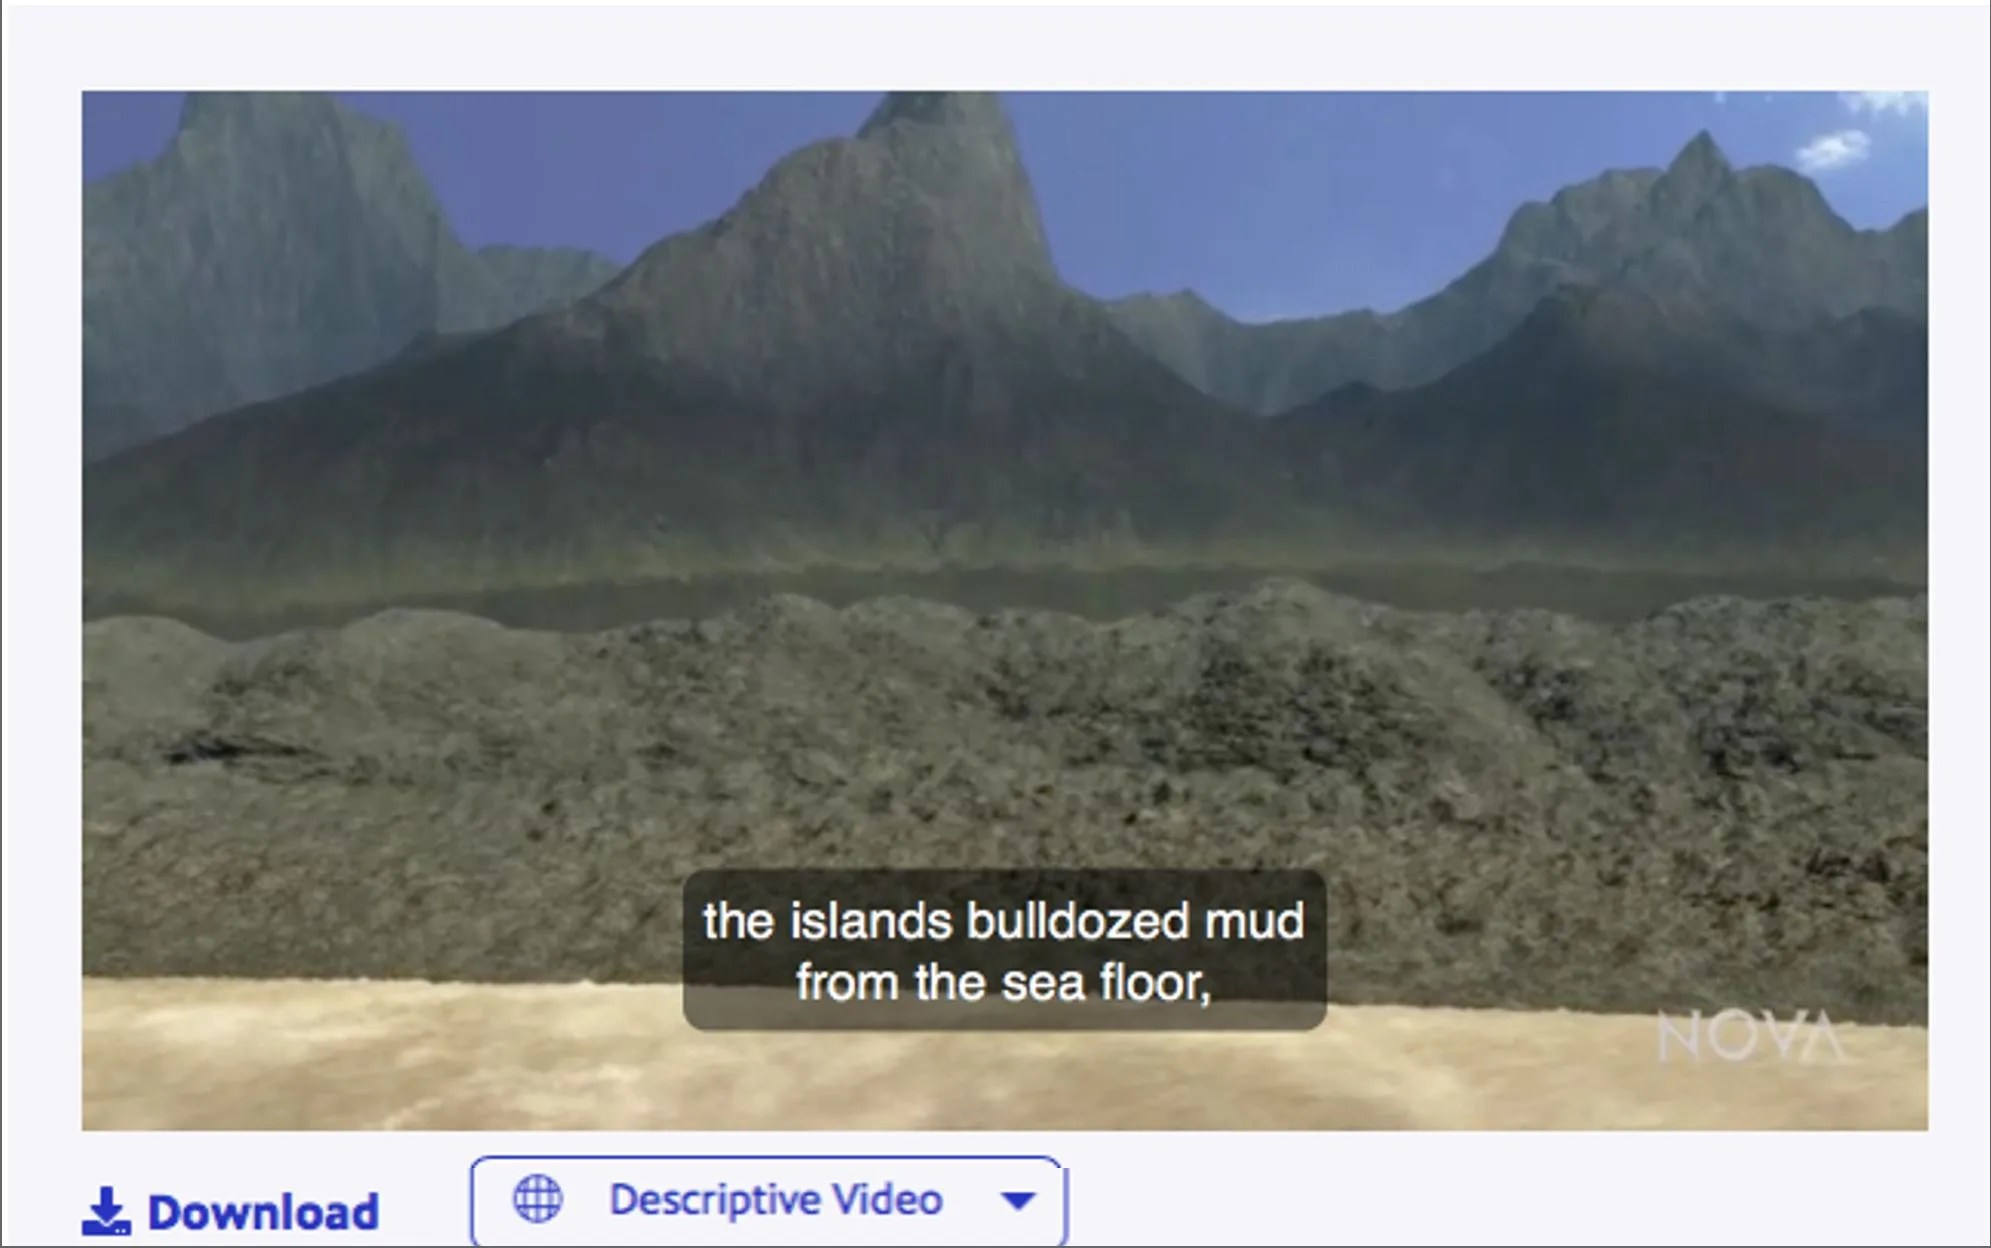 Screenshot from a Descriptive Video player depicting captions over a video.